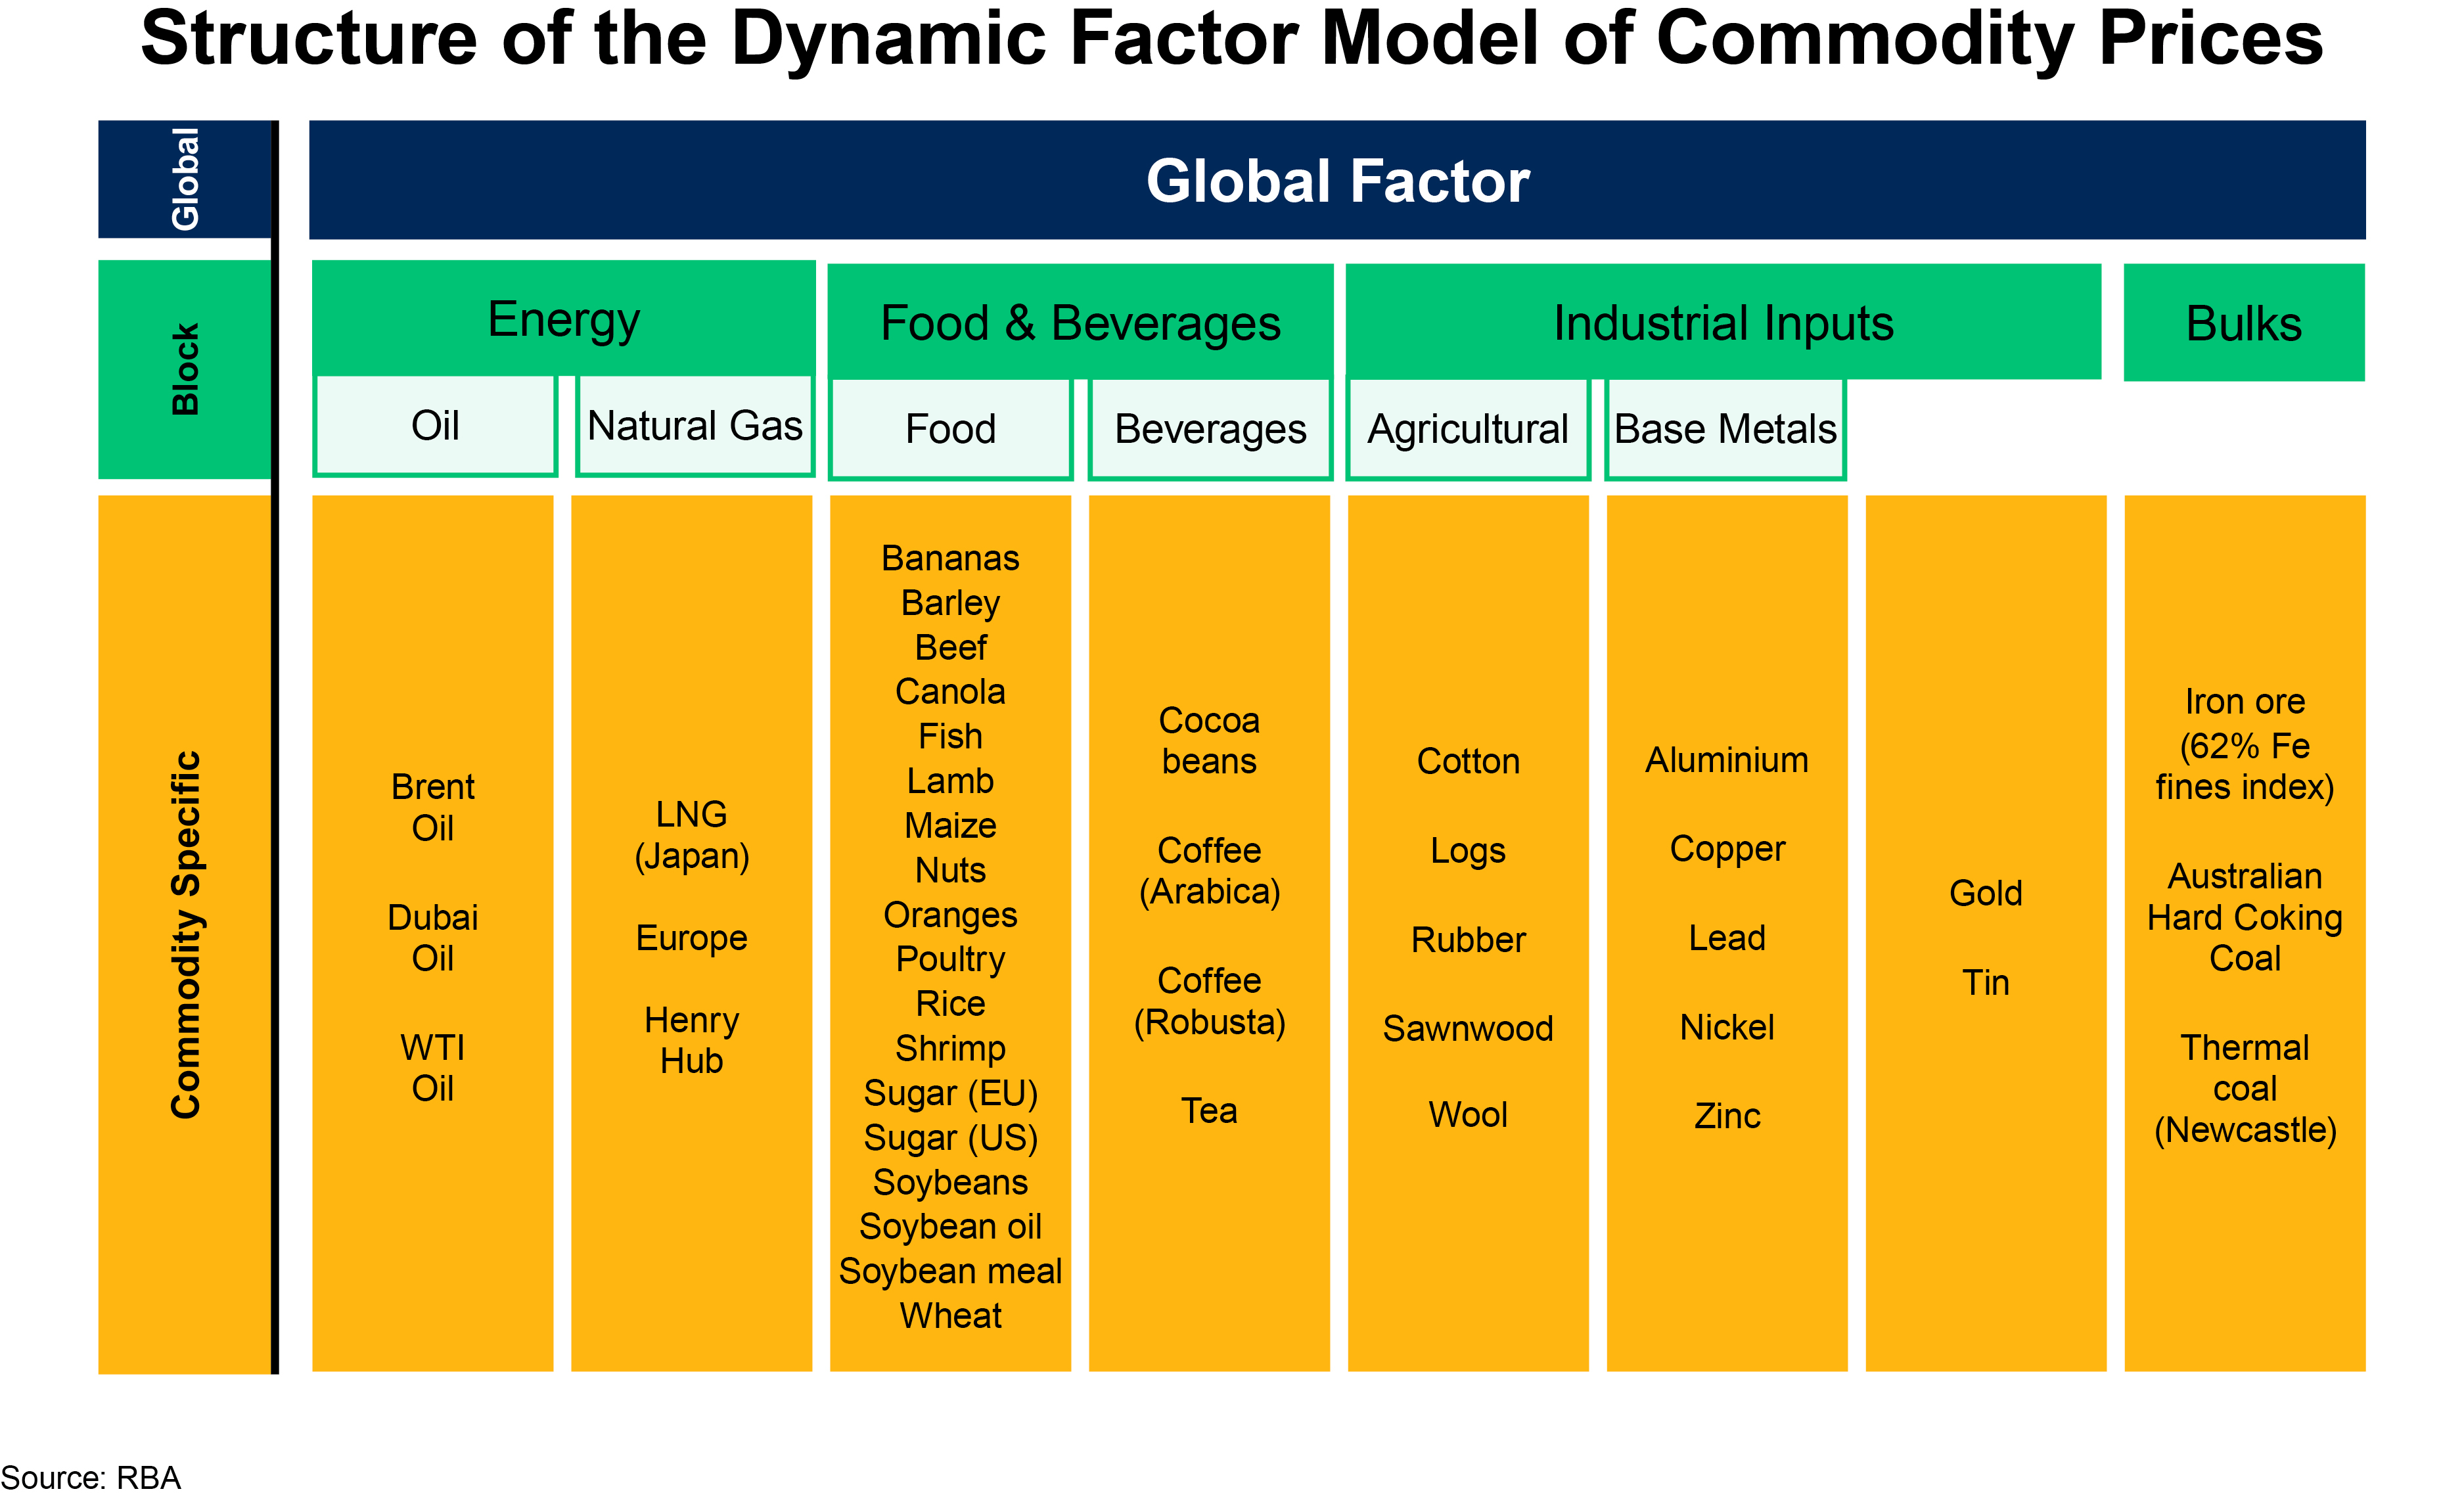 Figure 1: Structure of the Dynamic Factor Model of Commodity Prices